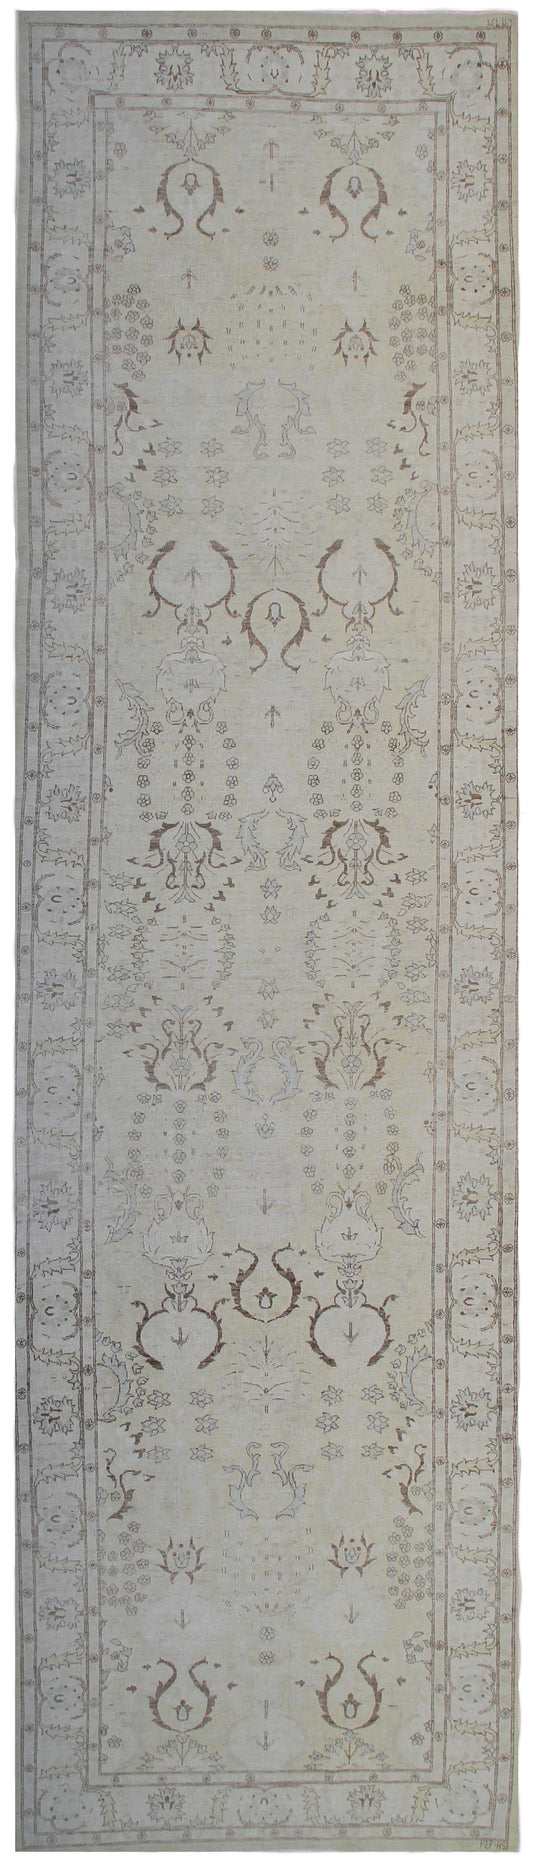 4'x14' Long and Wide Ariana Luxury Runner Rug